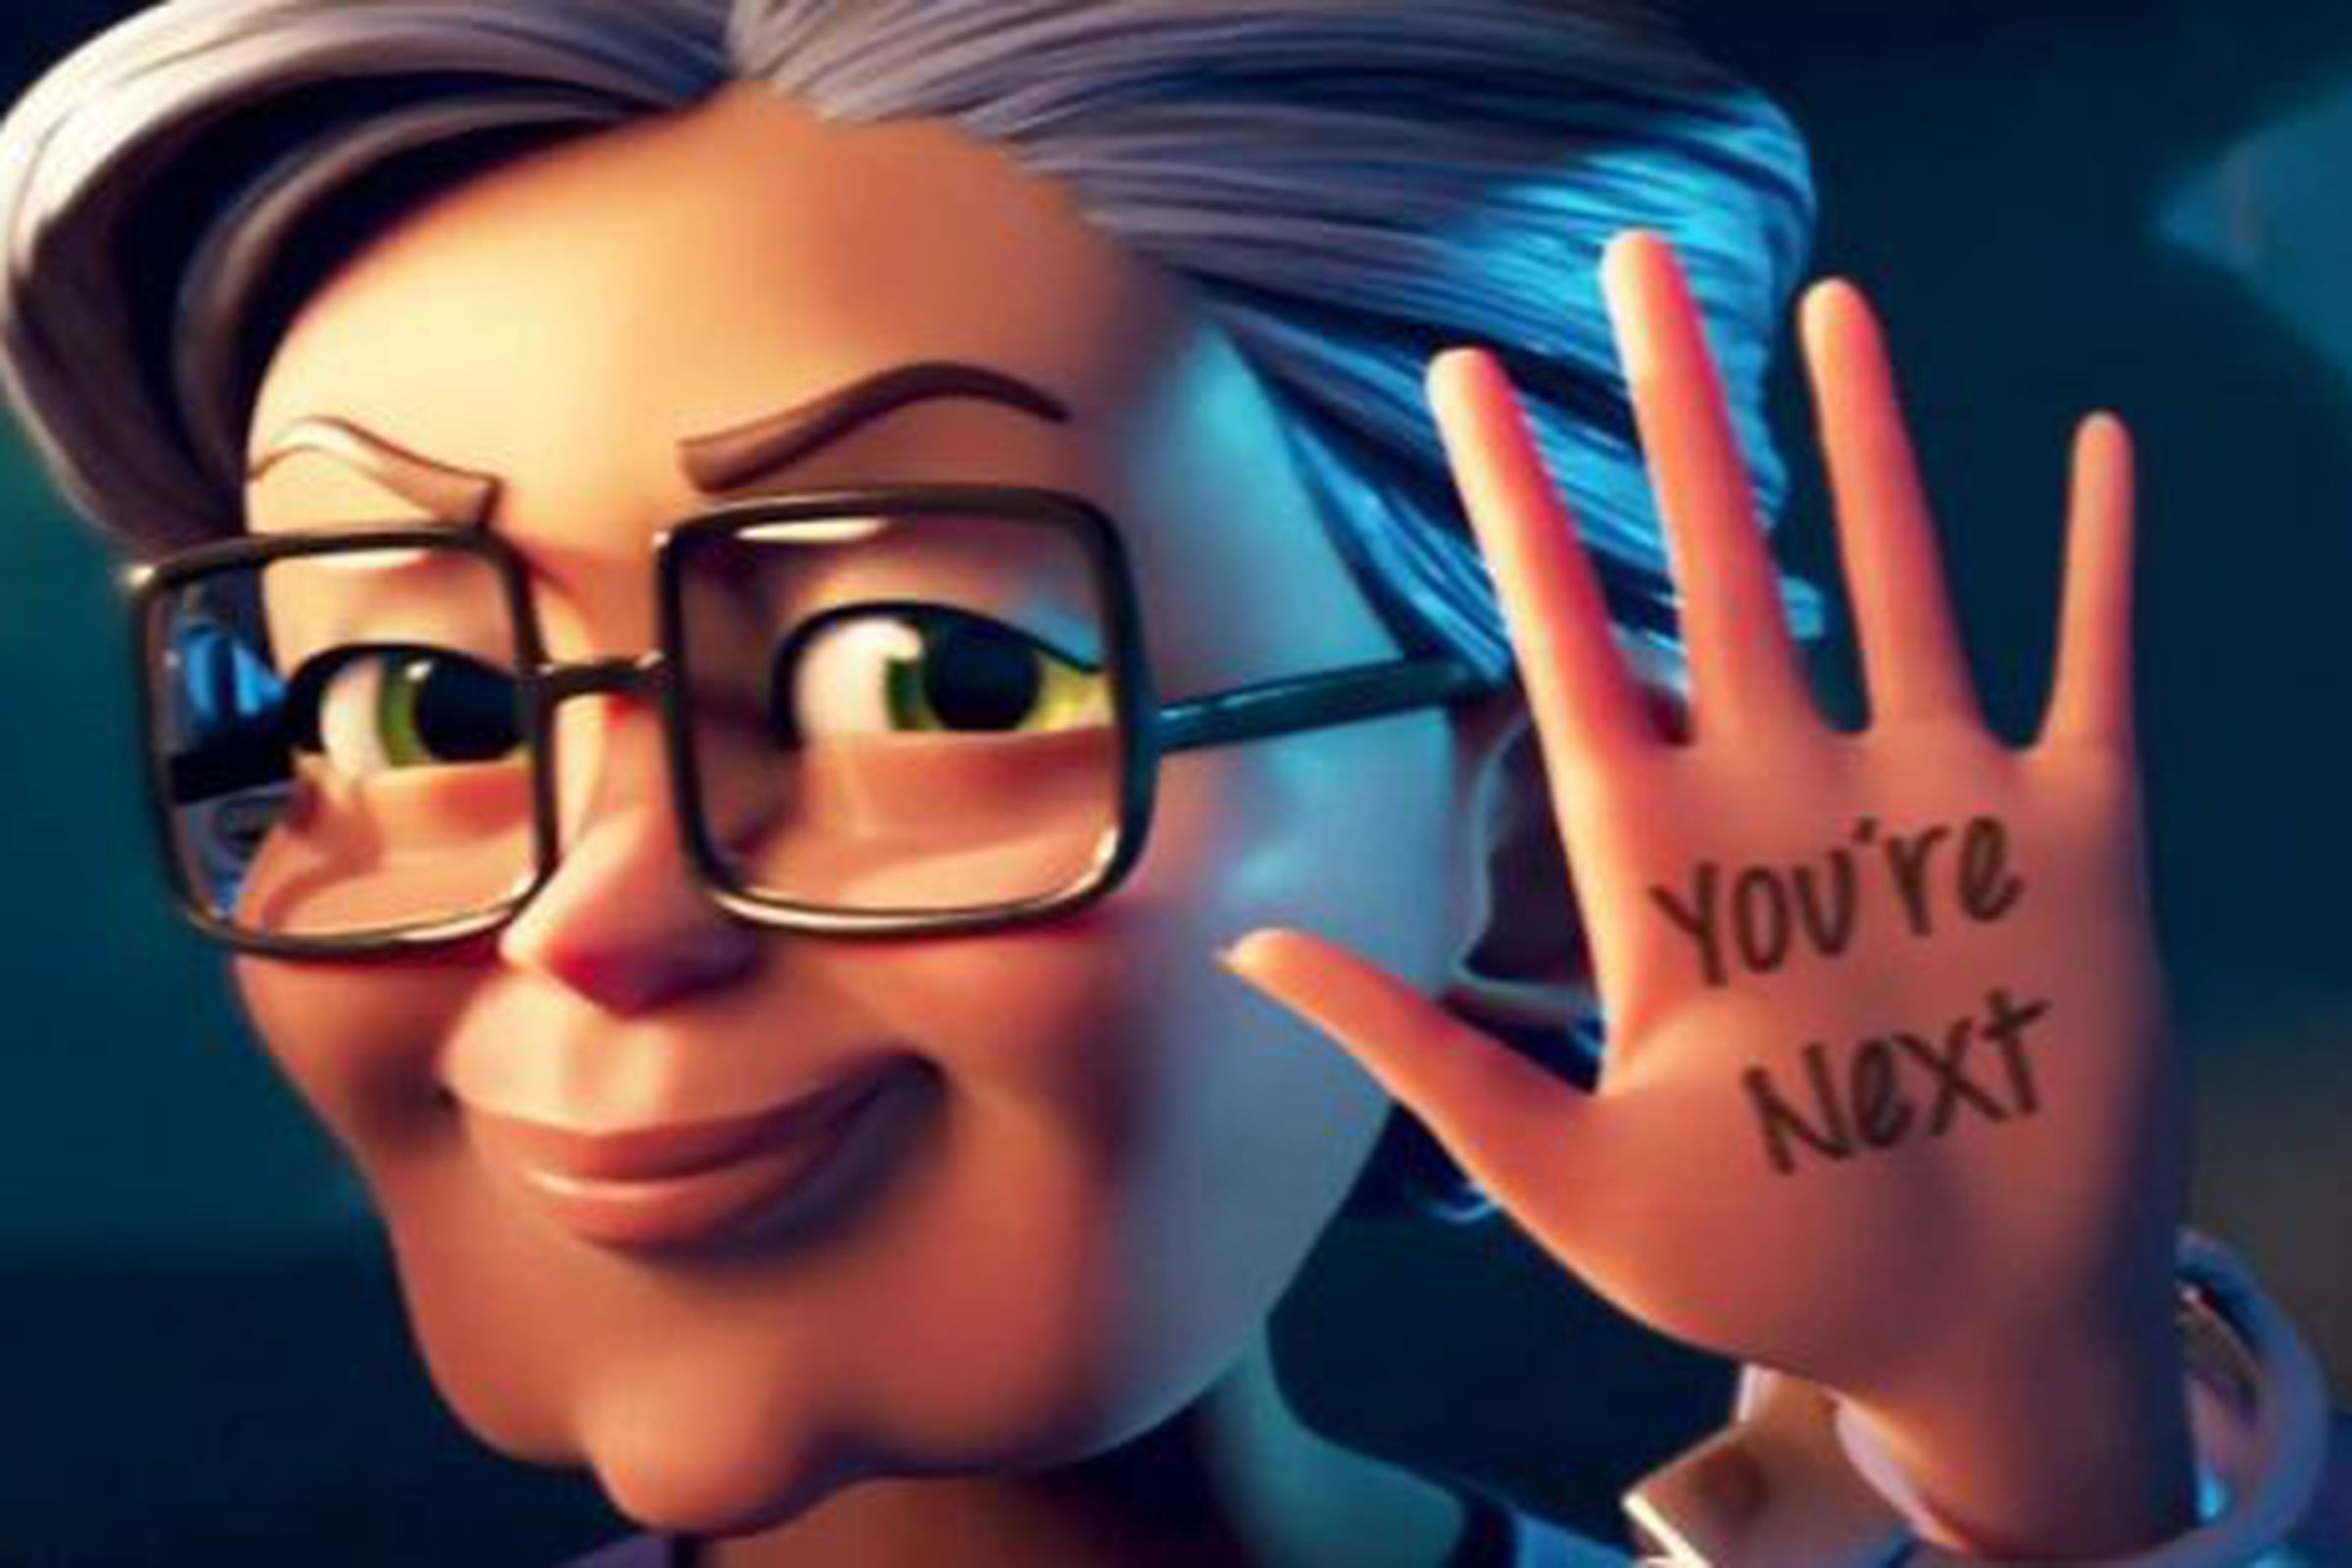 Screenshot from Merge Mansion ad featuring a sinister-looking elderly woman with text written on her hand that reads, “You’re next!”